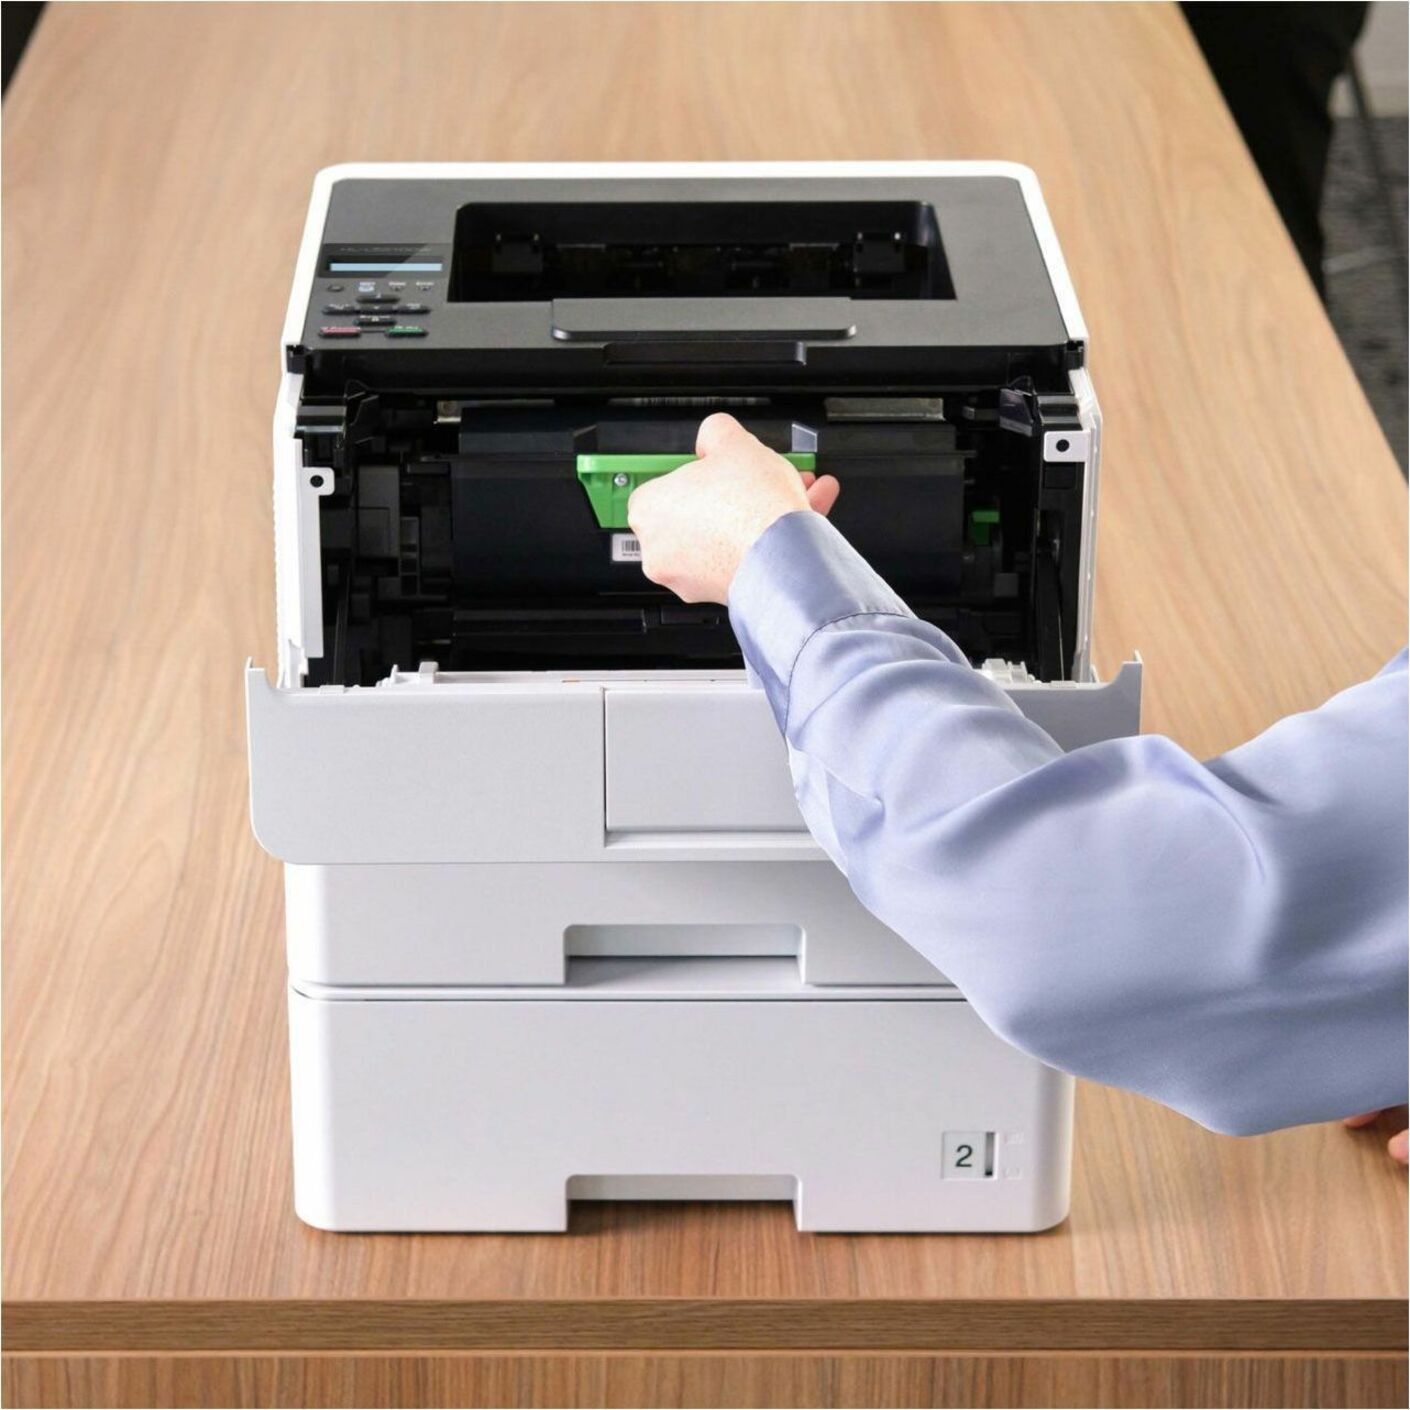 Brother HLL6210DWT HL-L6210DWT Business Monochrome Laser Printer, Dual Paper Trays, Wireless Networking, Duplex Printing